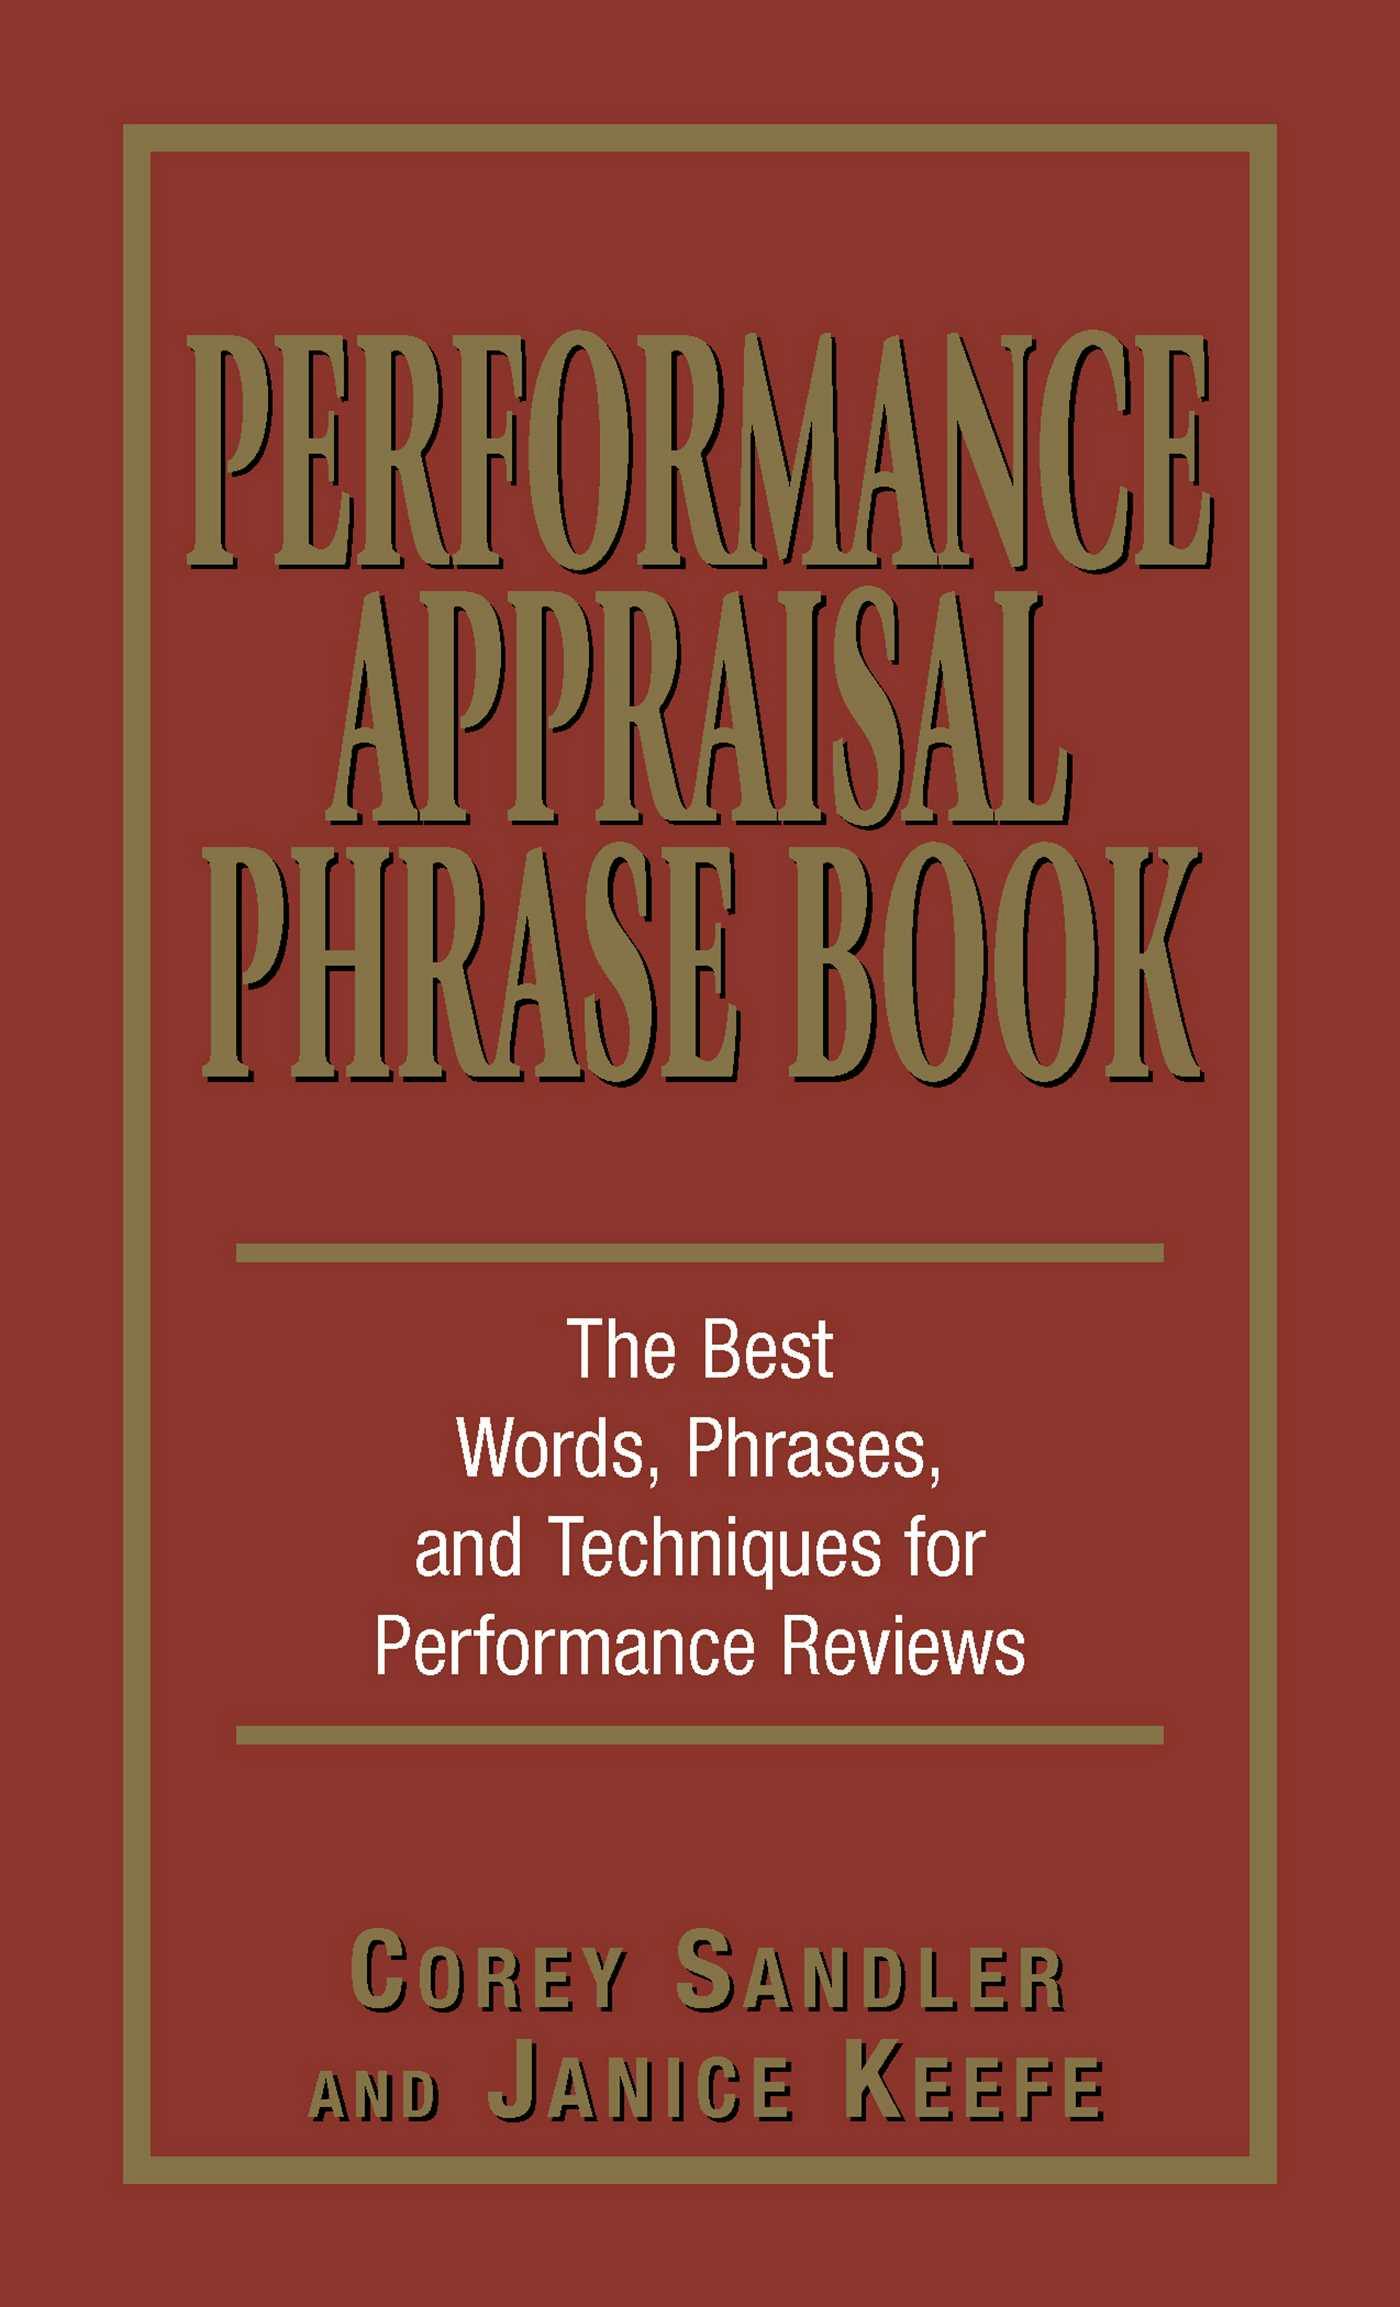 Performance Appraisal Phrase Book: The Best Words, Phrases, and Techniques for Performace Reviews - undefined